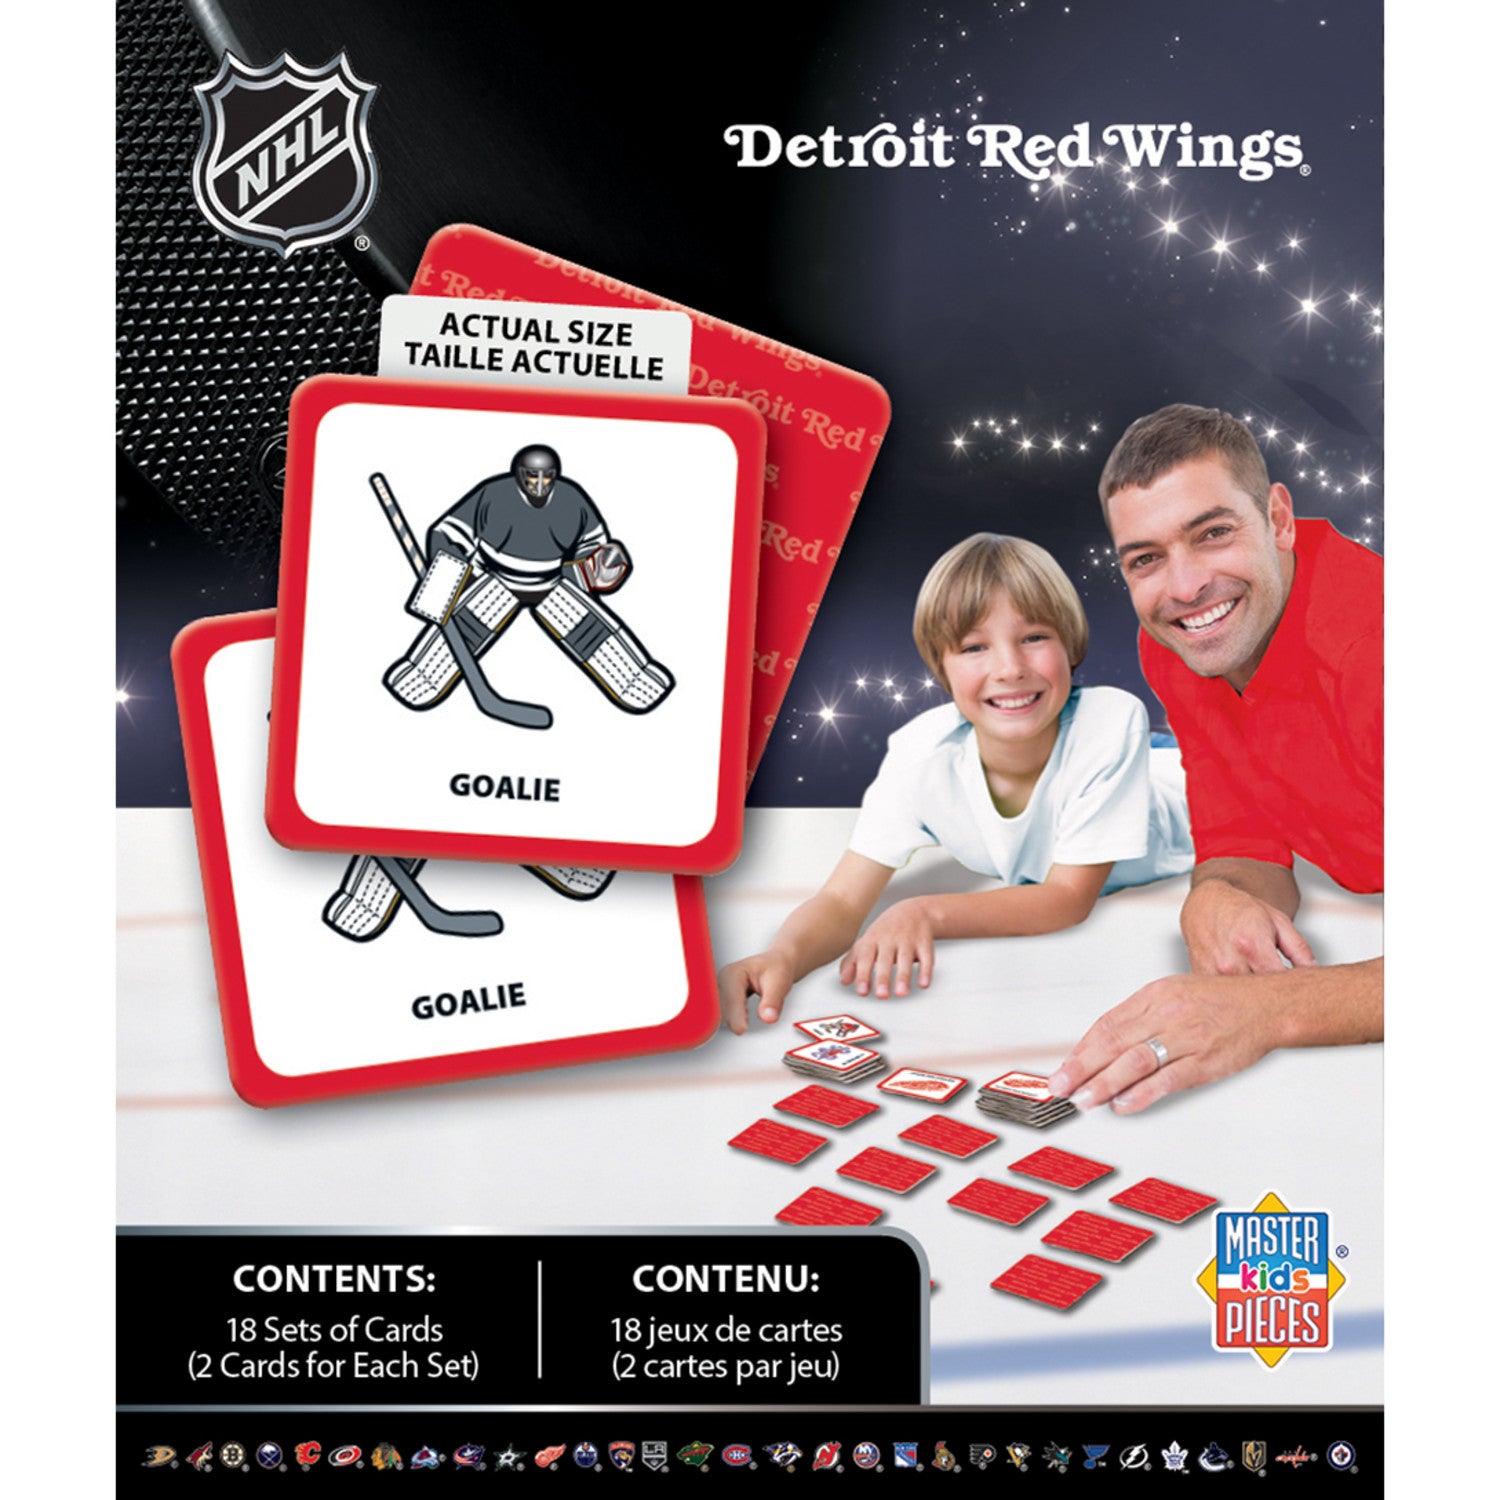 Detroit Red Wings Matching Game